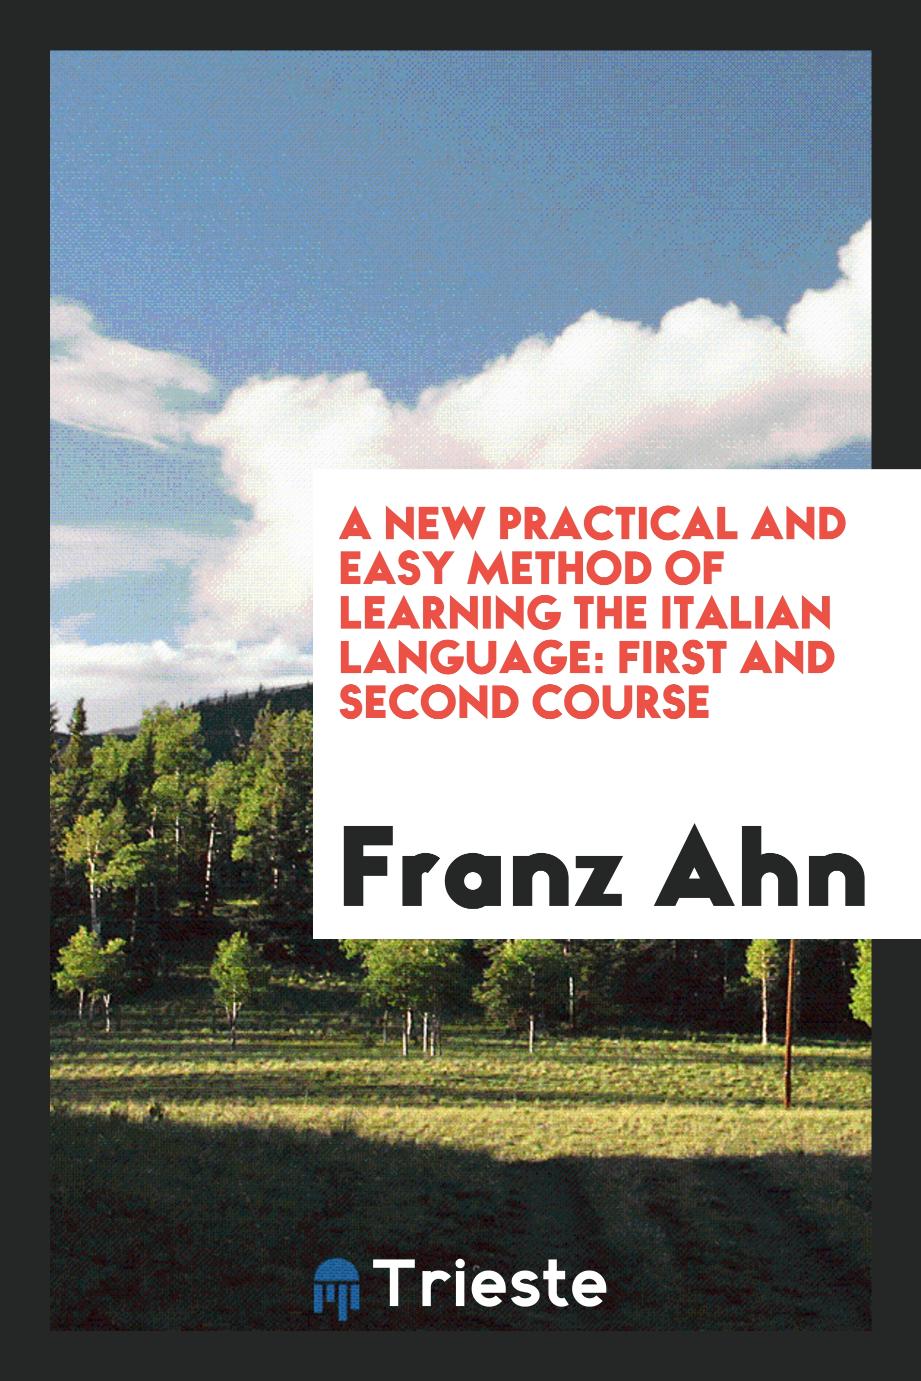 A New Practical and Easy Method of Learning the Italian Language: First and Second Course